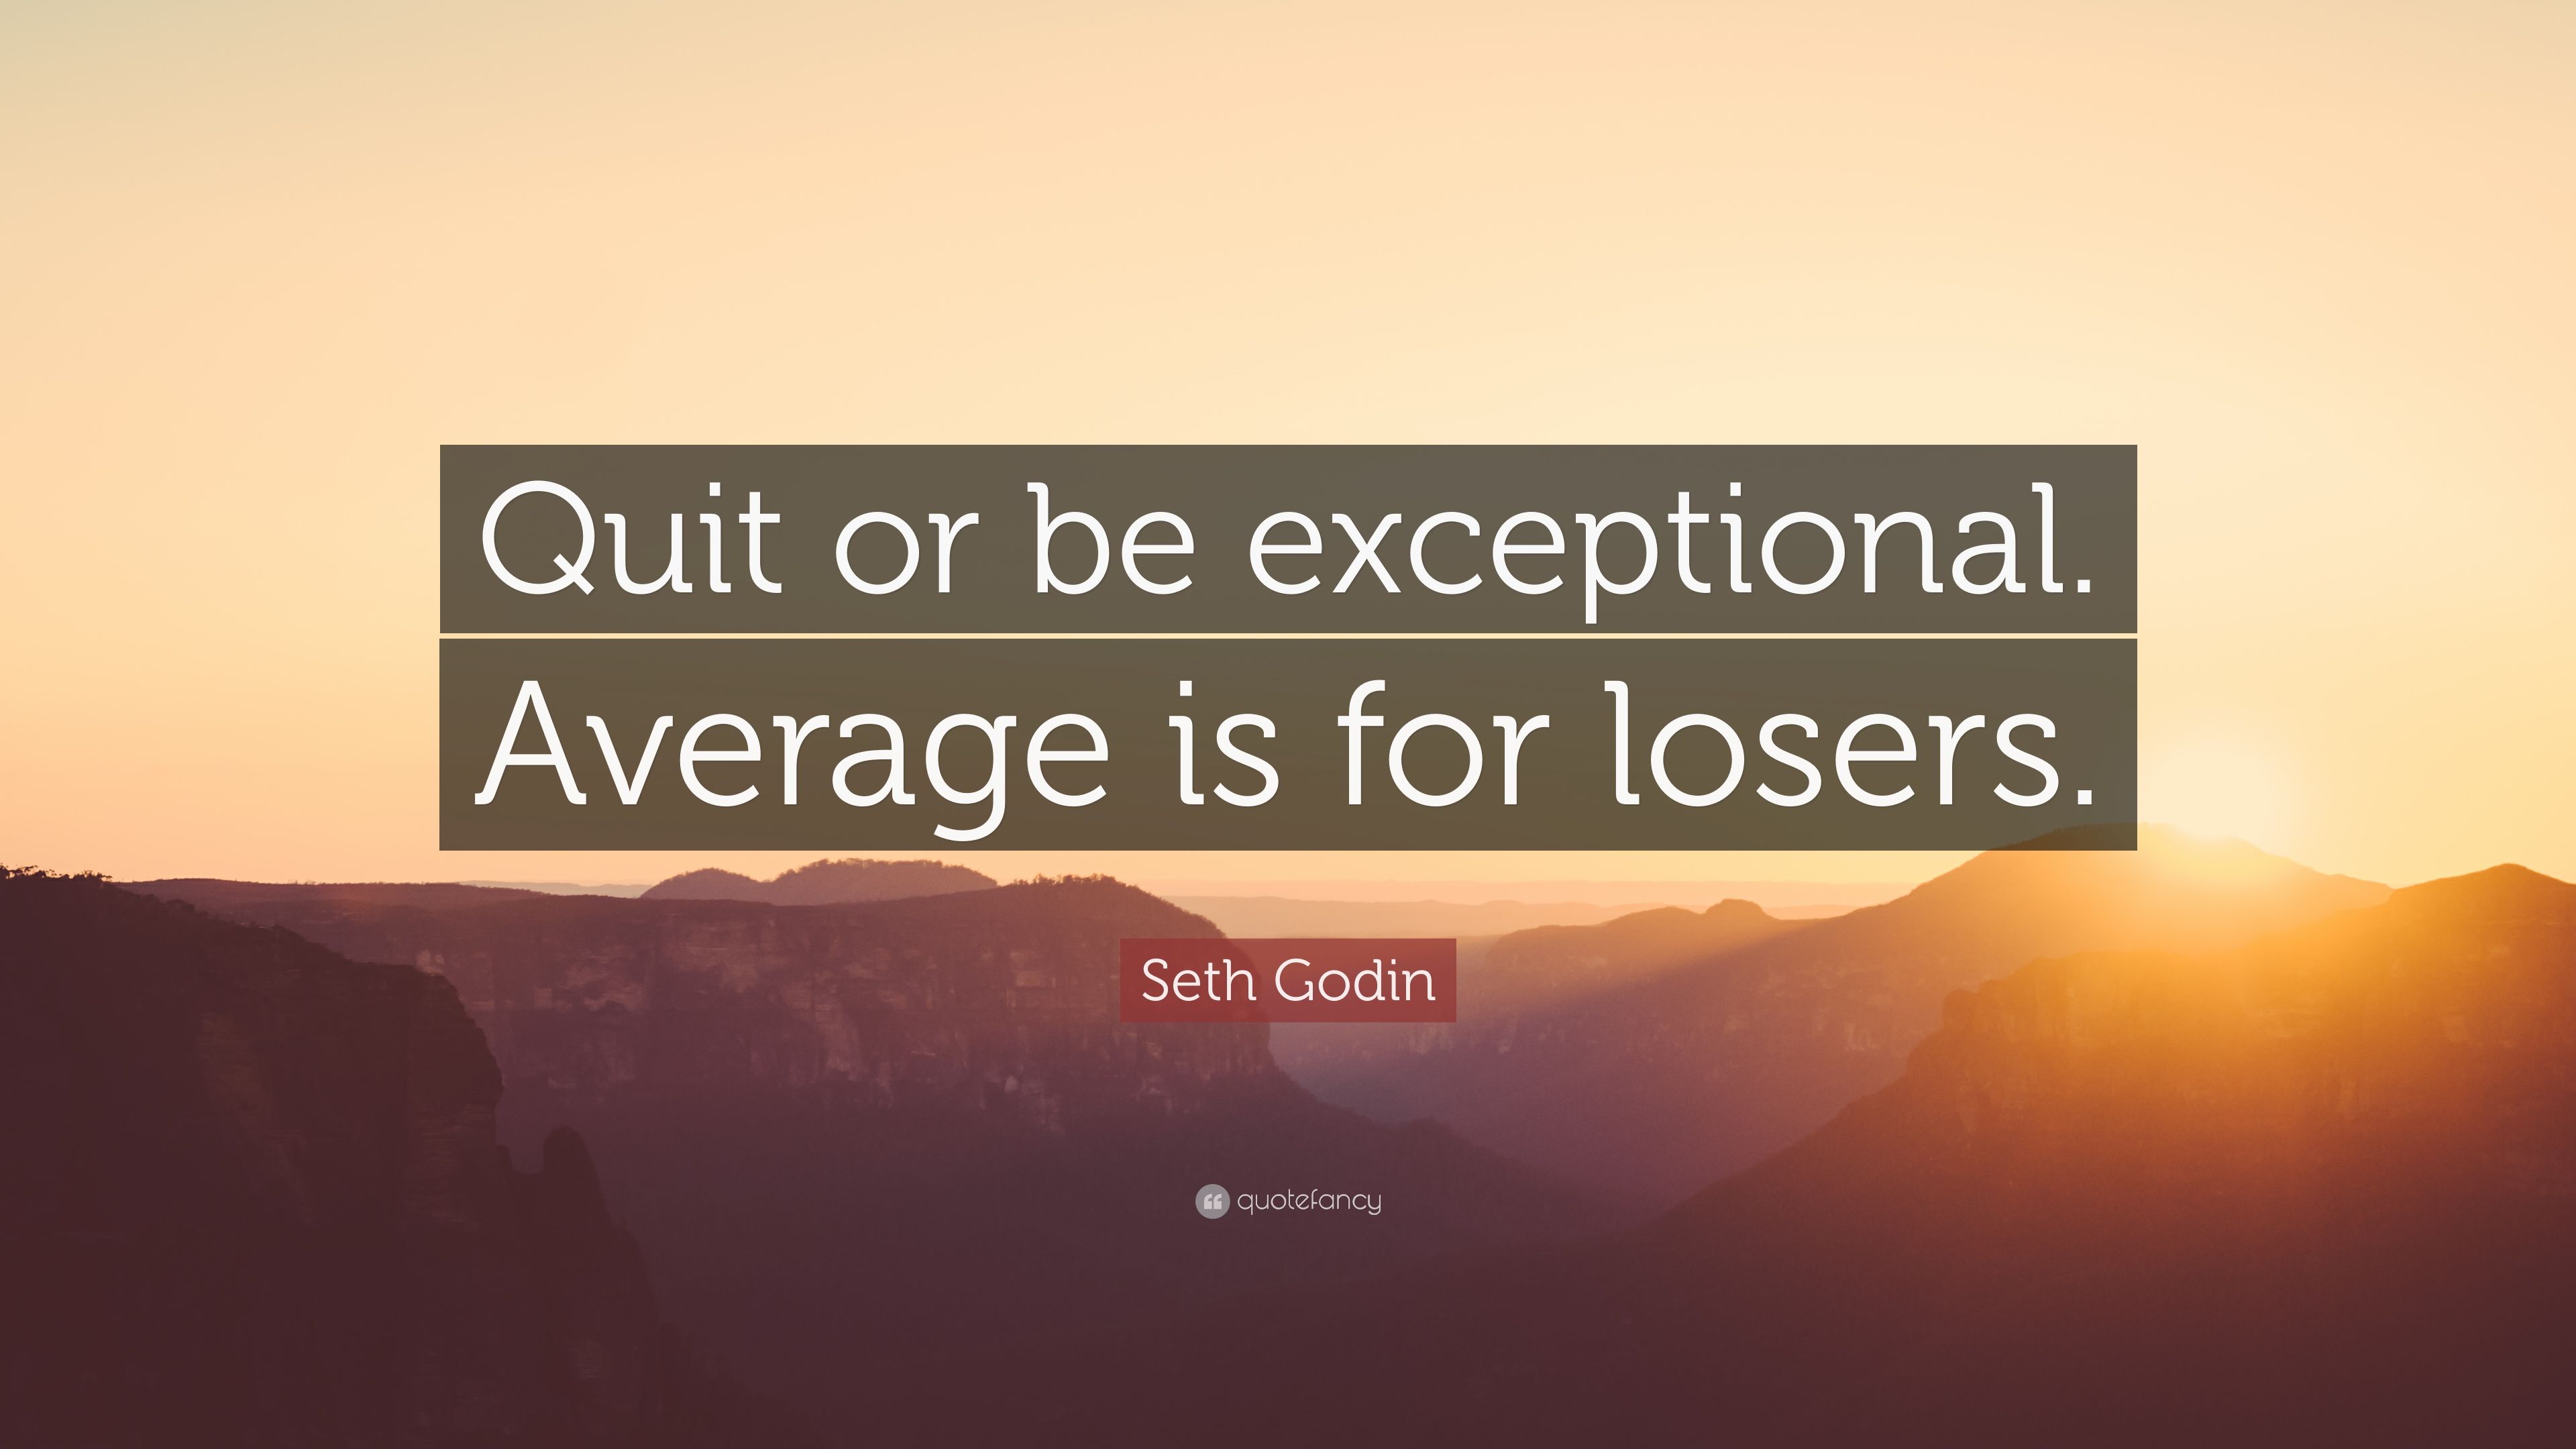 Seth Godin Quote: "Quit or be exceptional. 